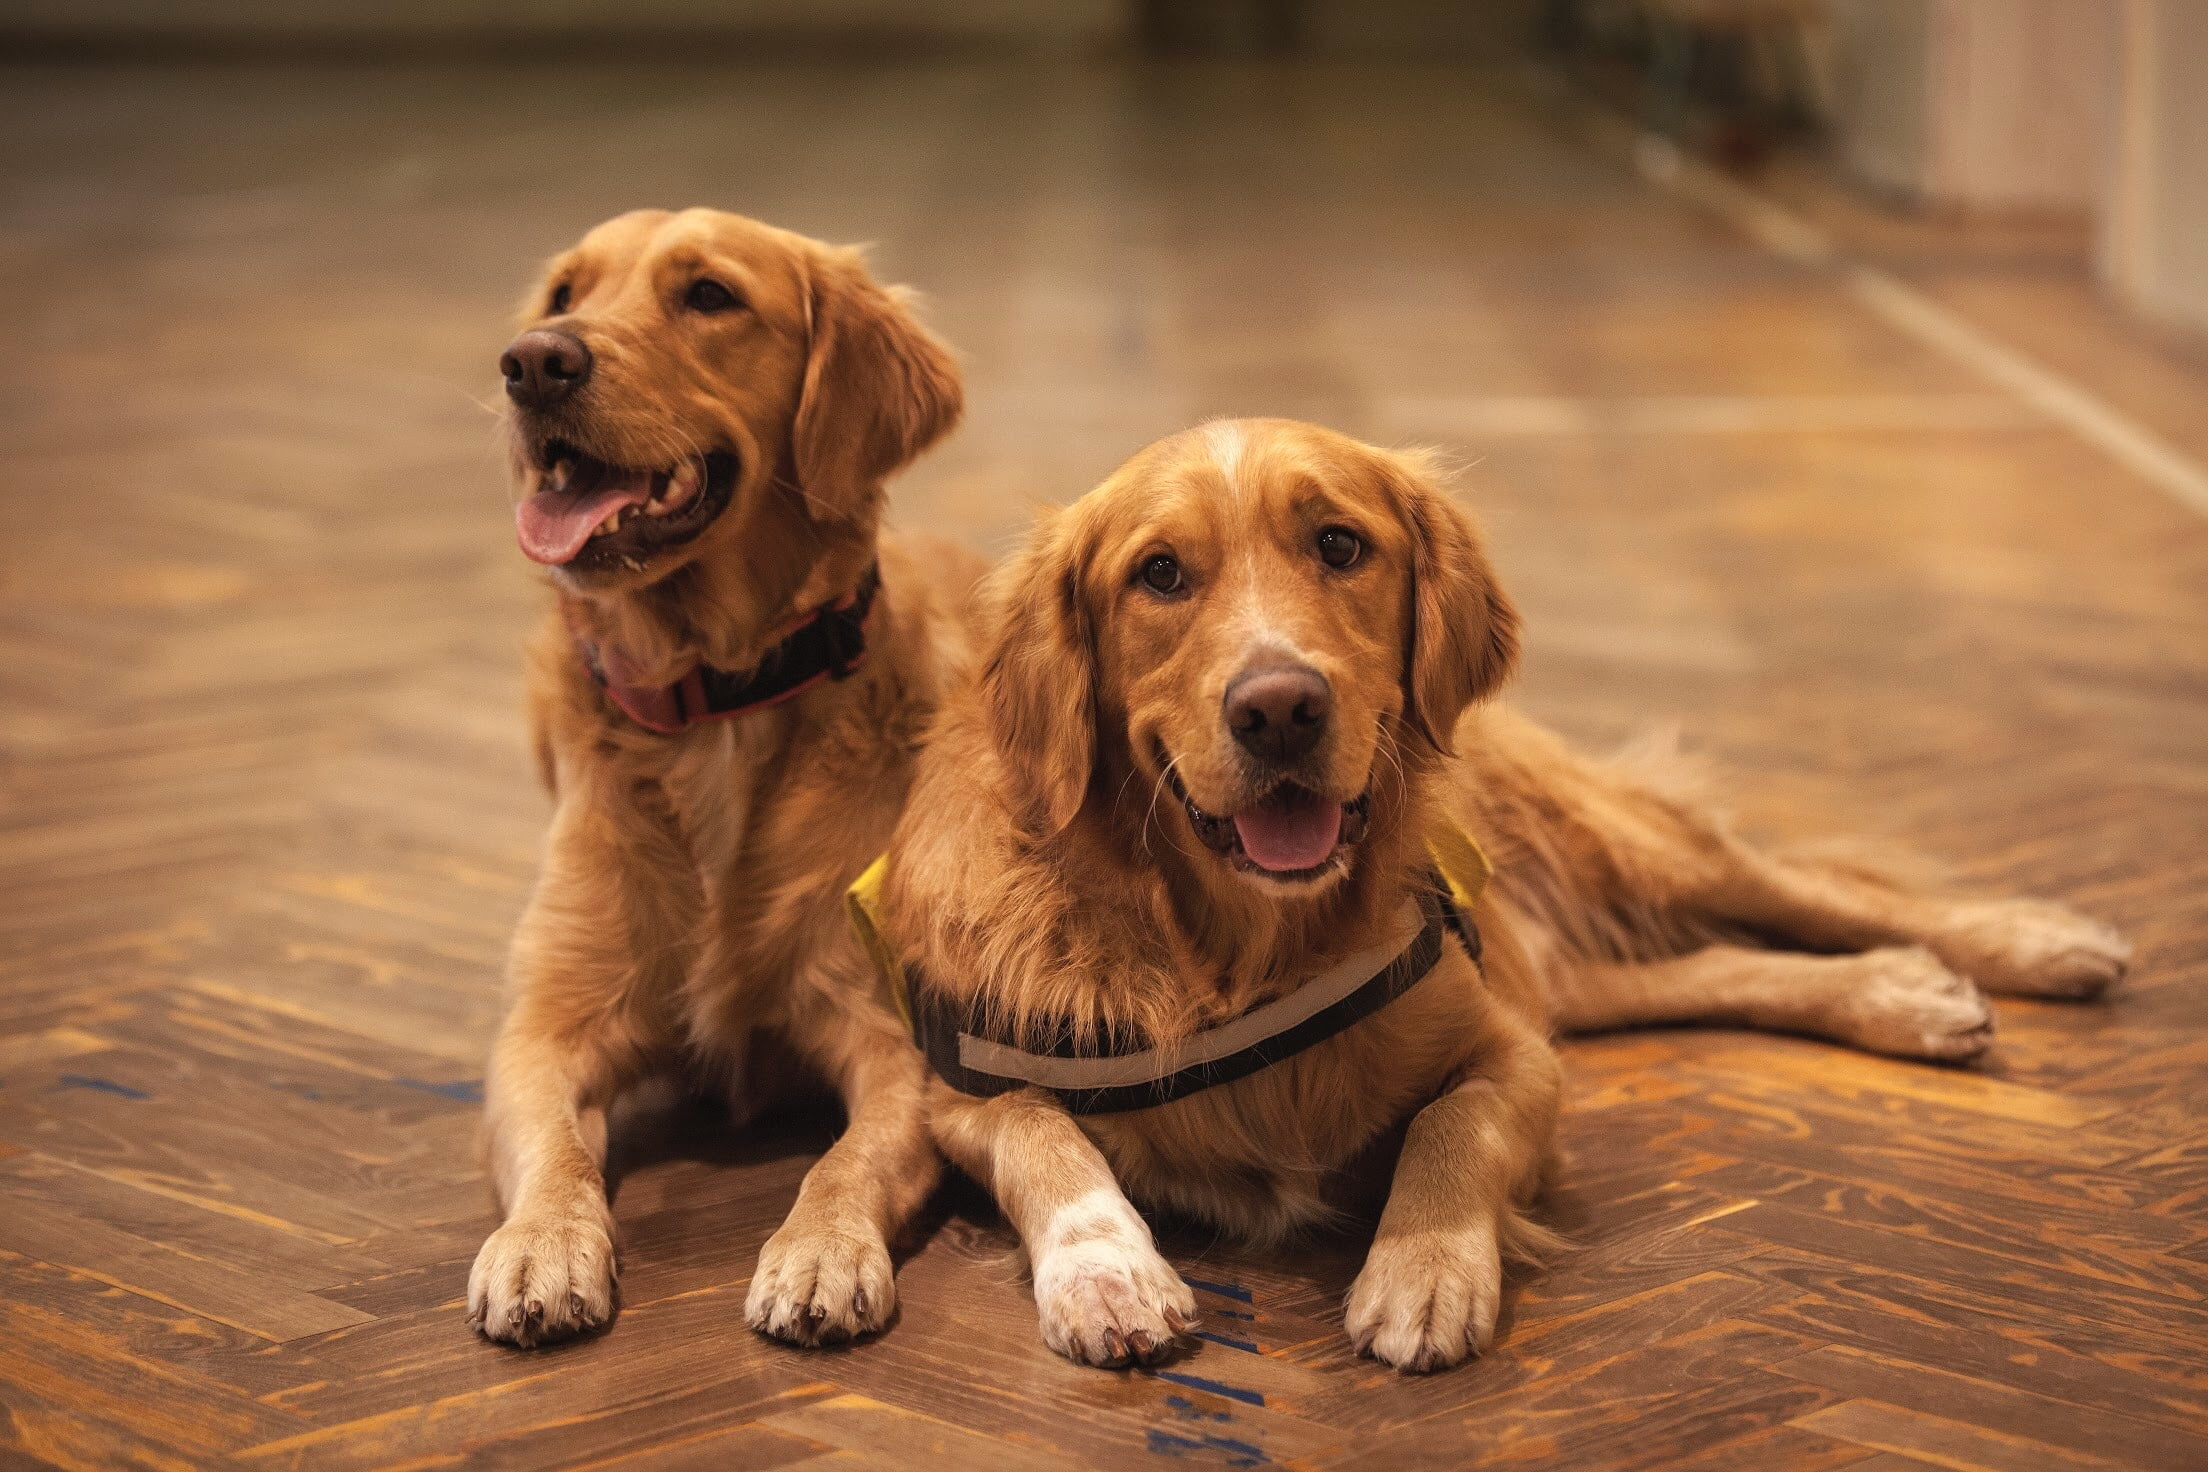 Adult Golden Retriever and Puppies - 5 Important food FAQs